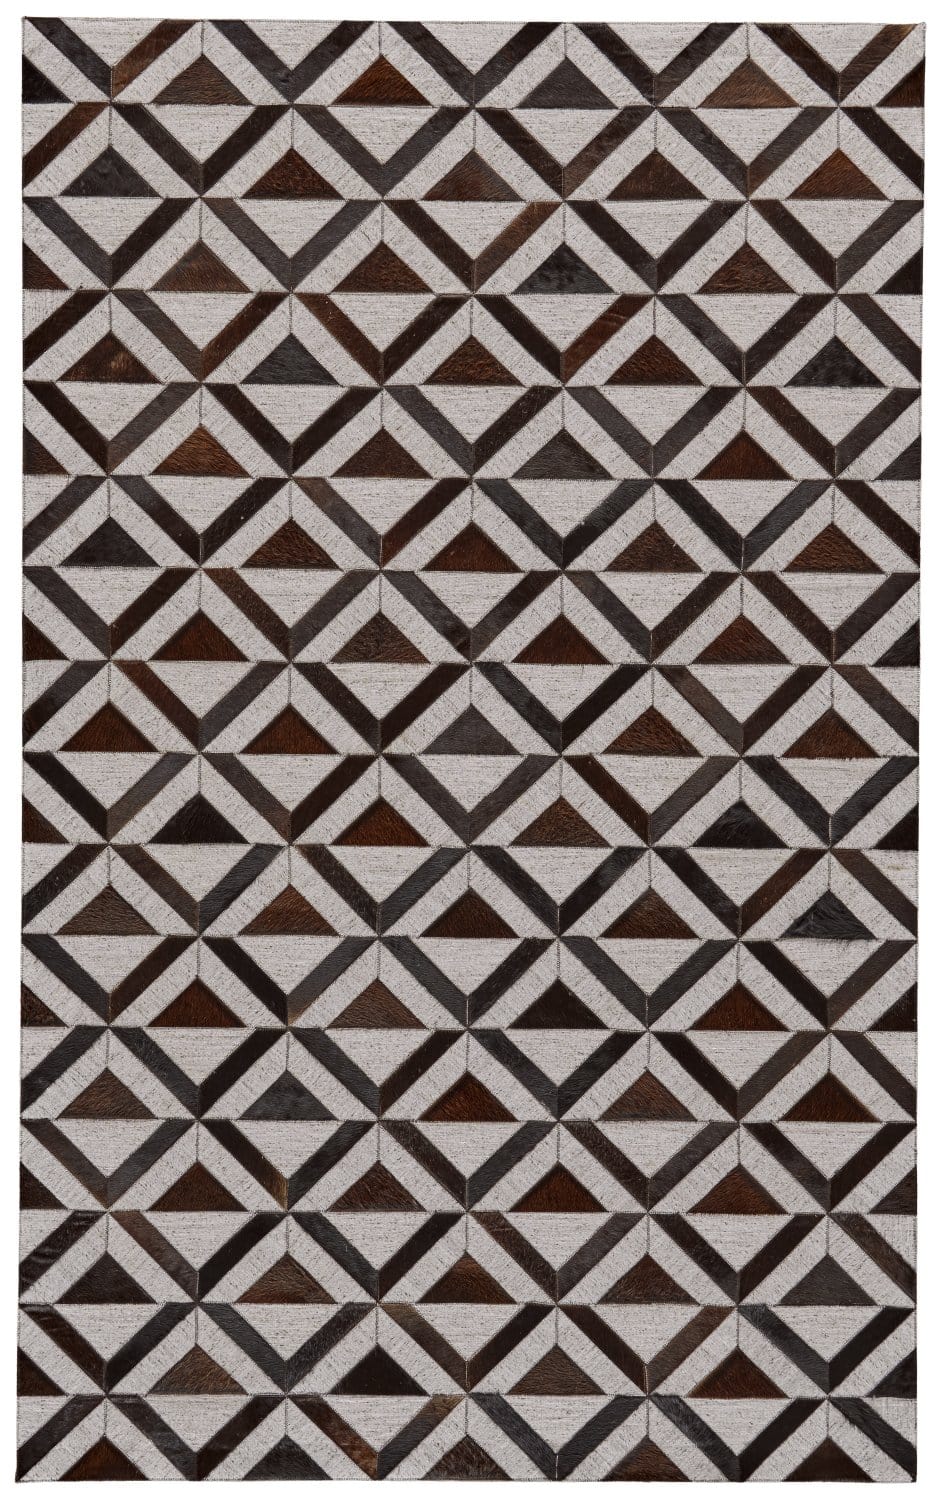 Feizy Fannin Handmade Diamond Leather Rug - Gray & Brown - Available in 4 Sizes